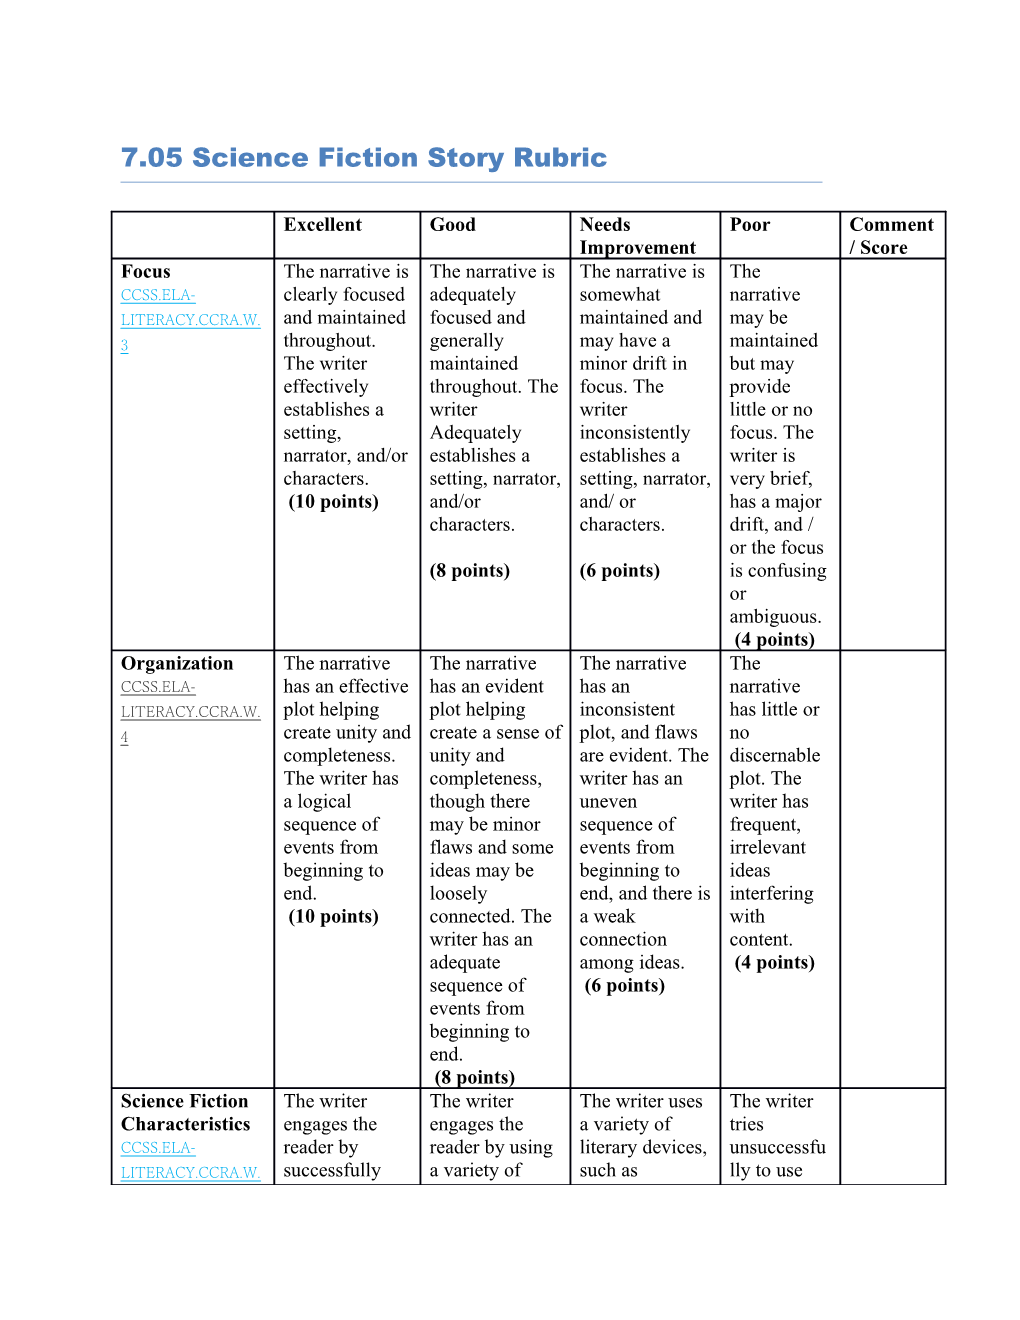 7.05Science Fiction Story Rubric